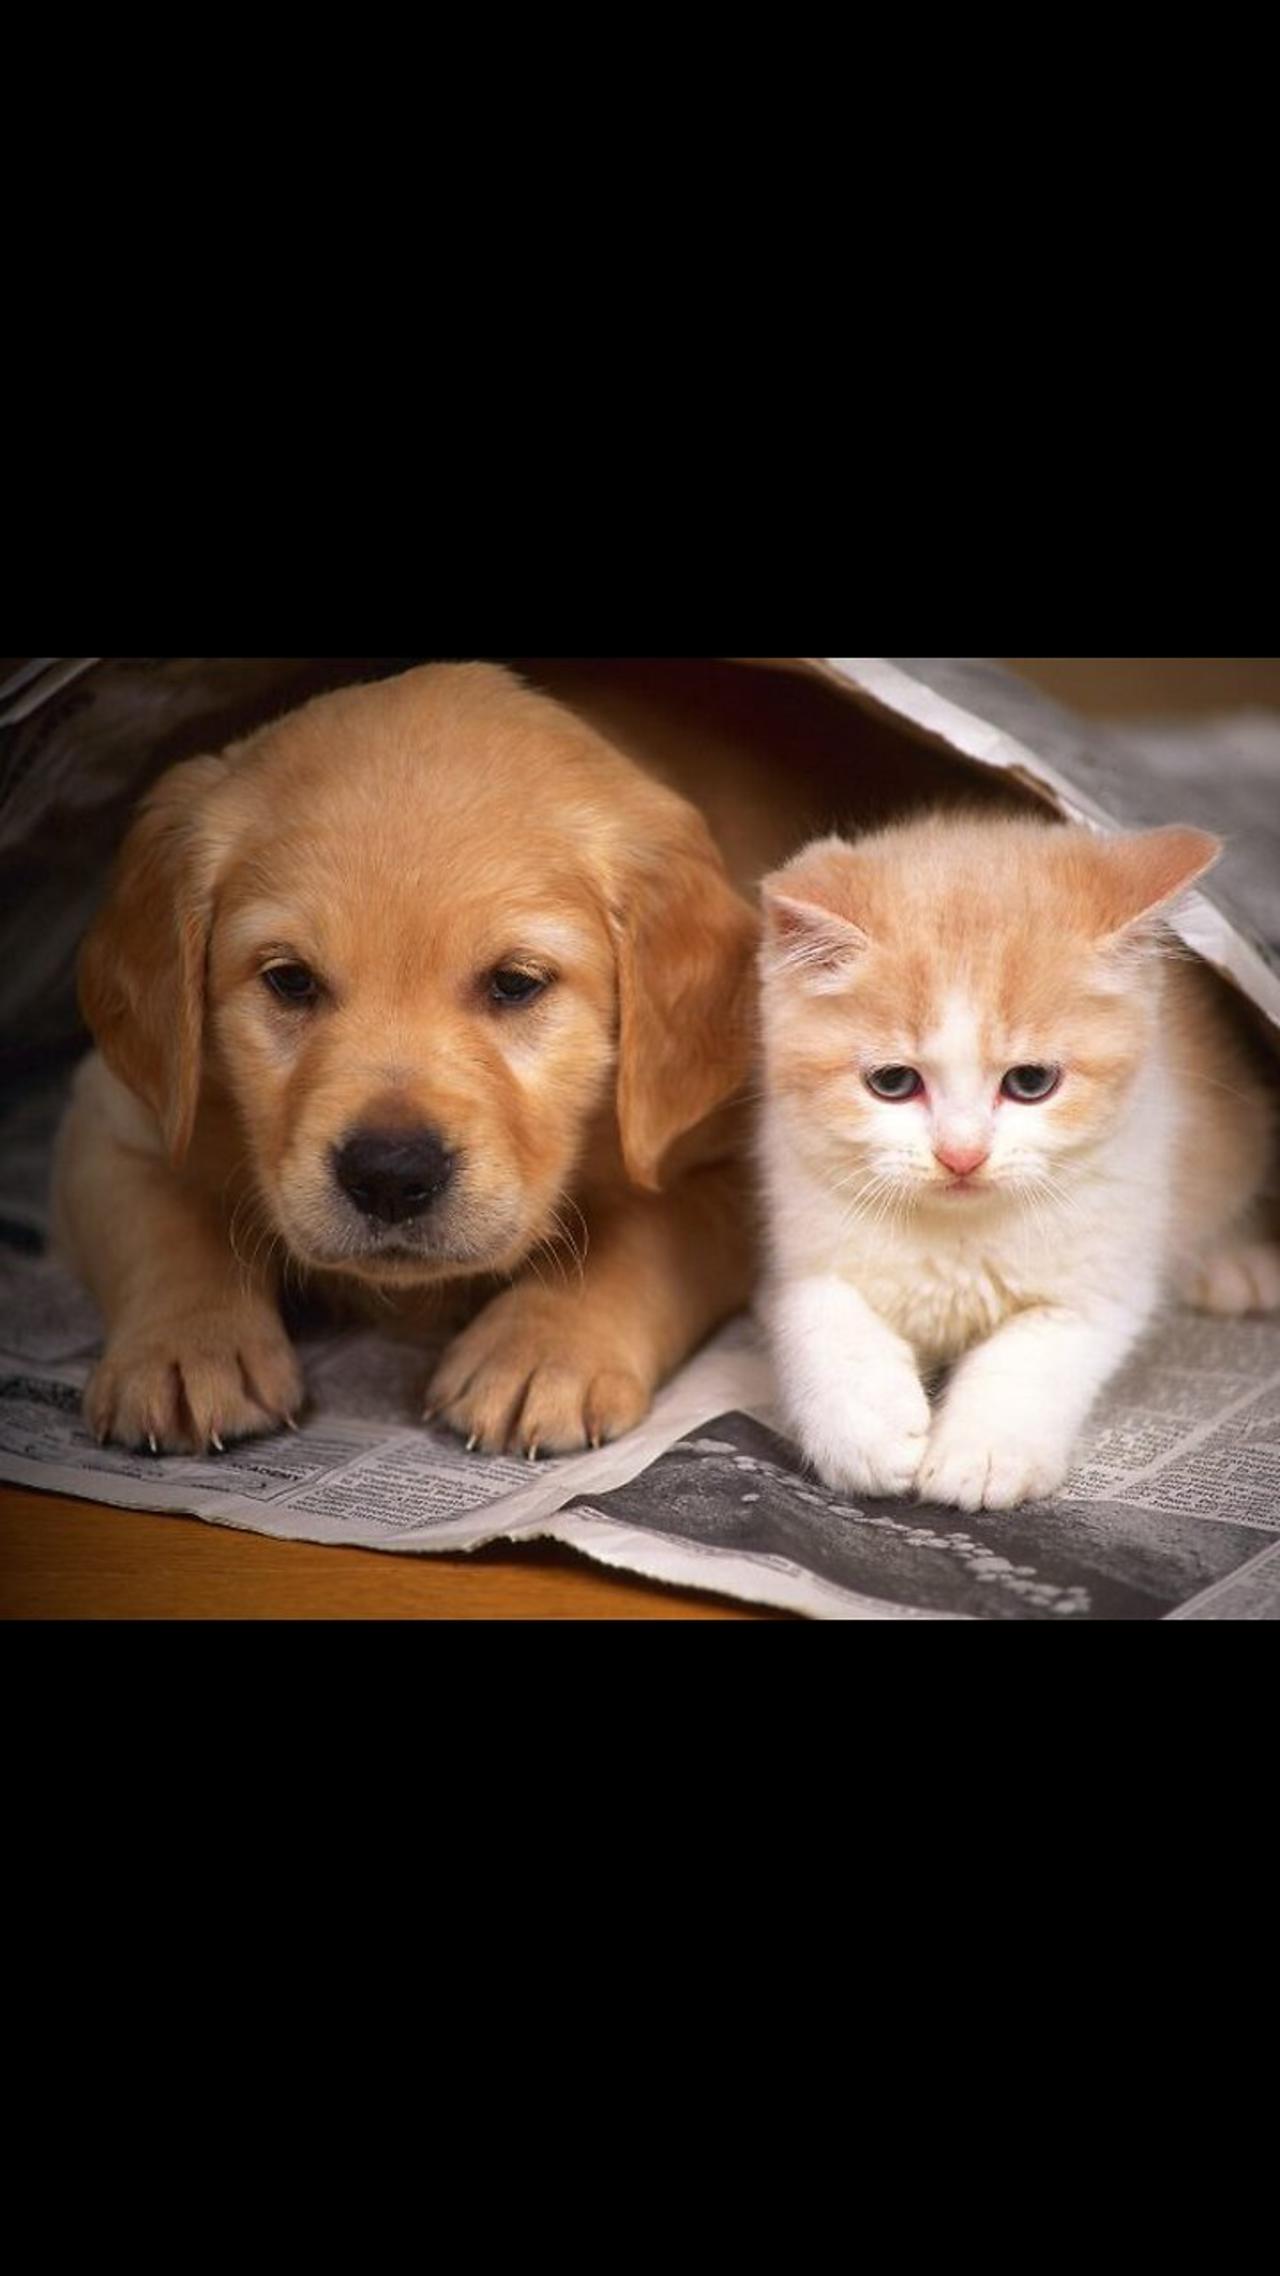 Baby Animals Funny Cats and Dogs Videos Compilation.